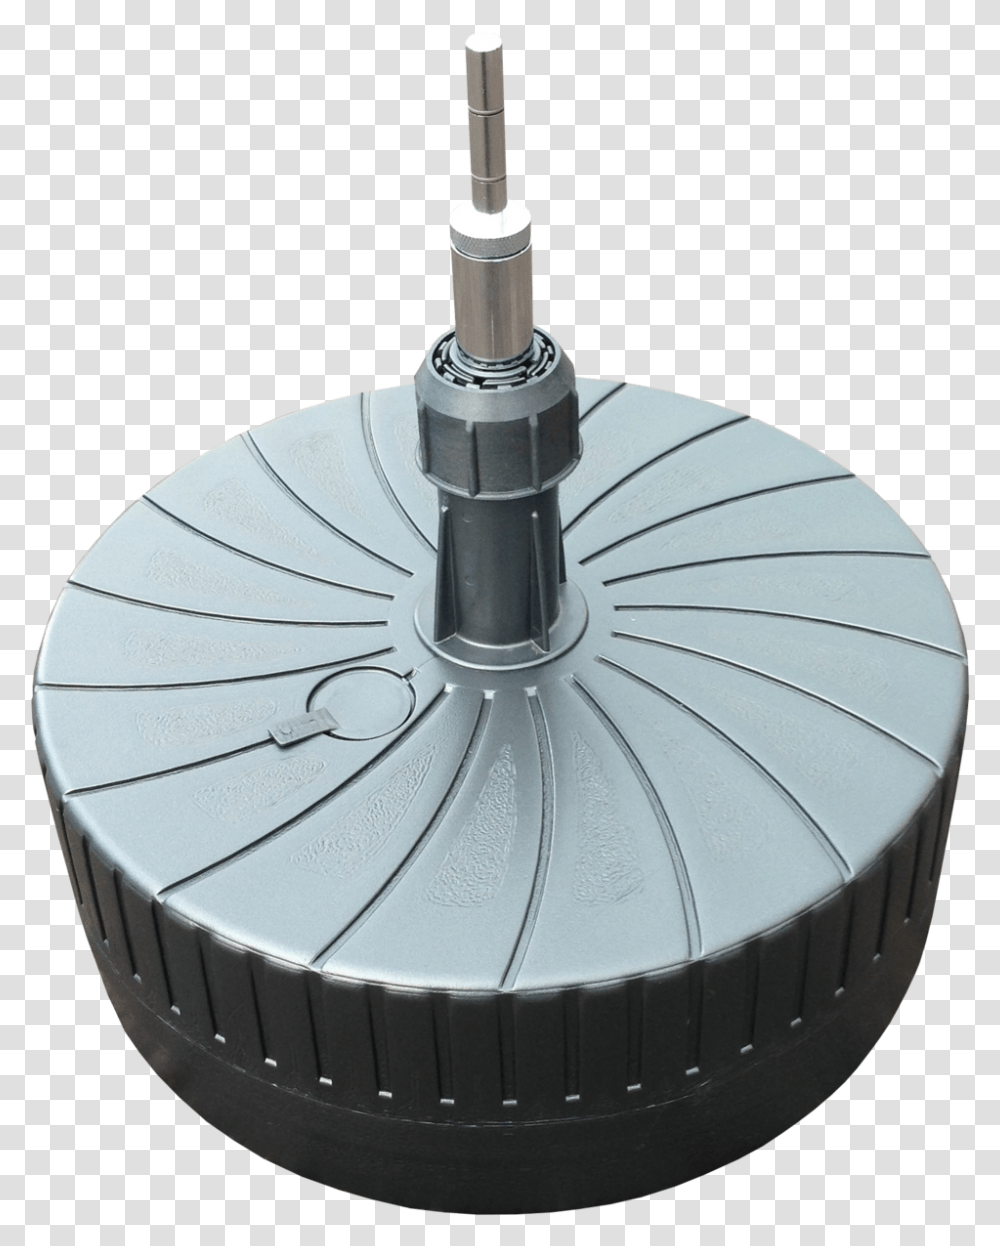 Universal Flagpole With Single Millstone Base Drill, Dessert, Food, Mixer, Appliance Transparent Png